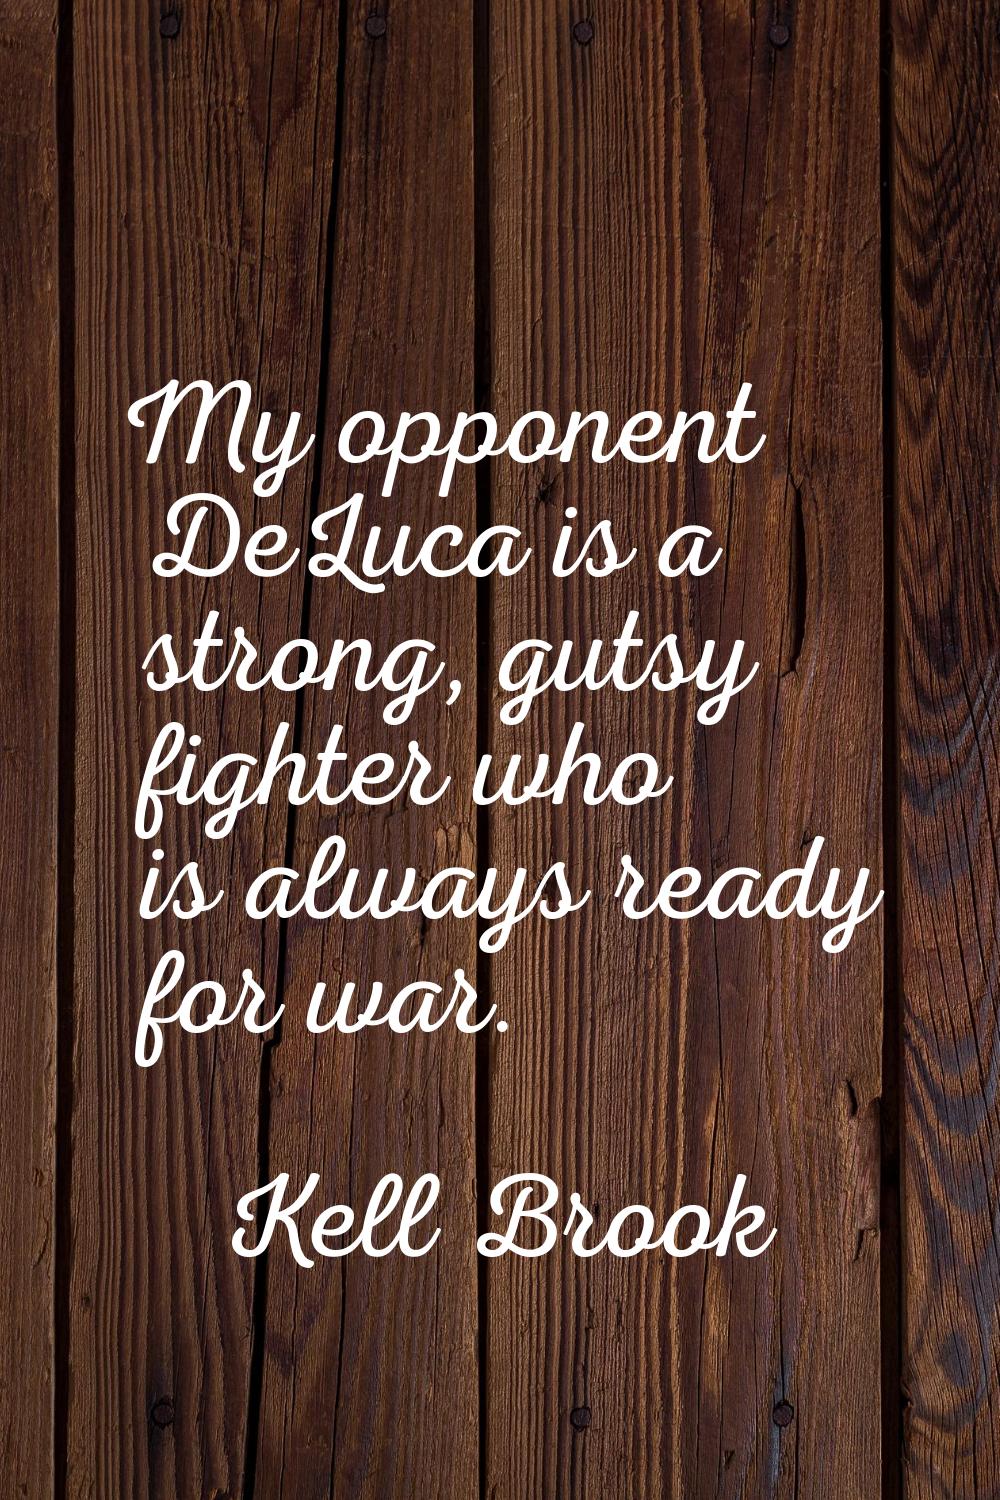 My opponent DeLuca is a strong, gutsy fighter who is always ready for war.